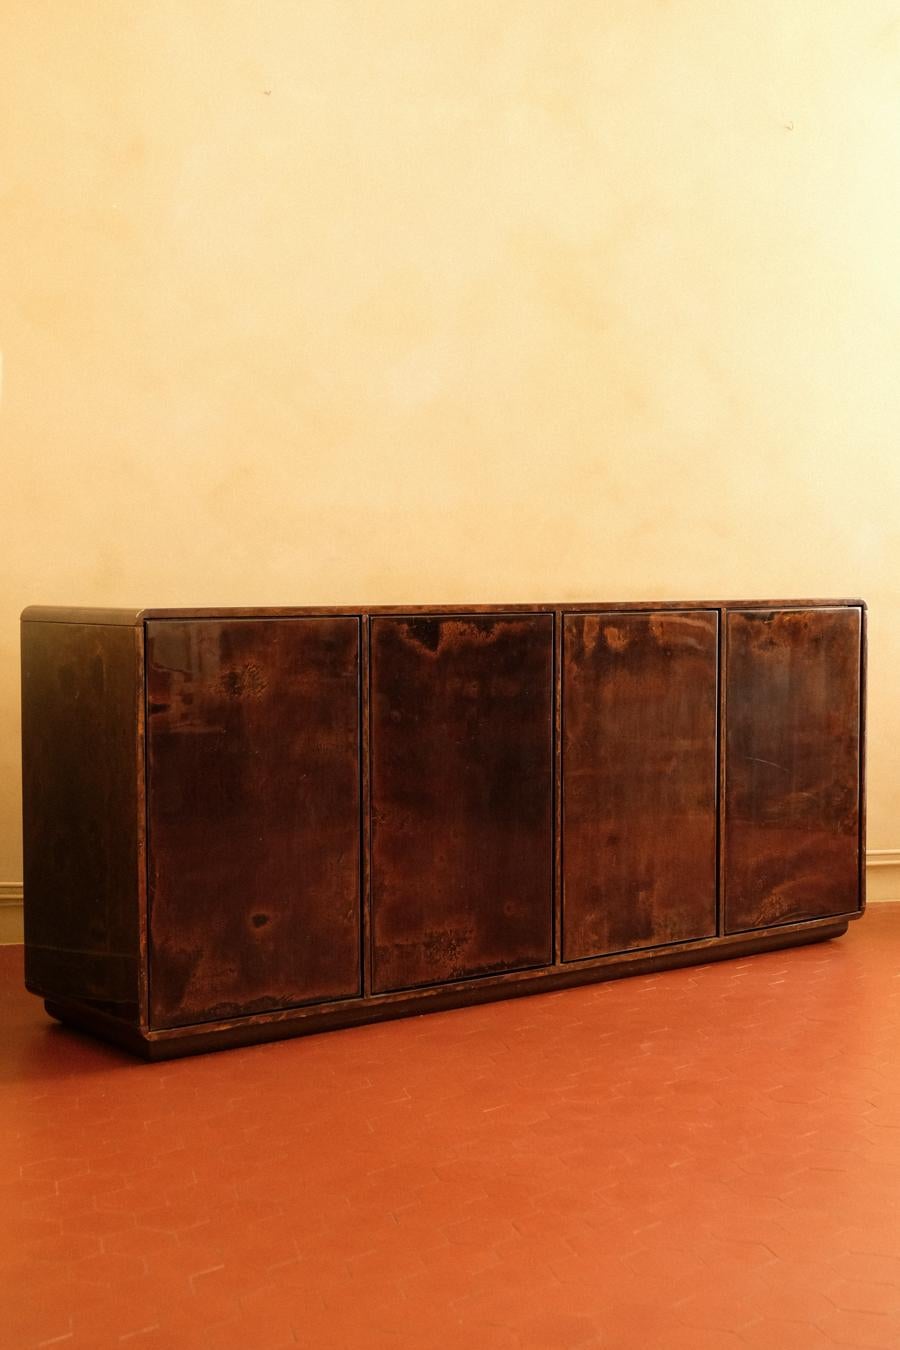 Very rare sideboard designed and made by the small Italian firm Ottini Milano, circa 1970. Made from wood entirely covered in lacquered parchment. Ottini was renowned among Italian designers and architects for making furniture using only